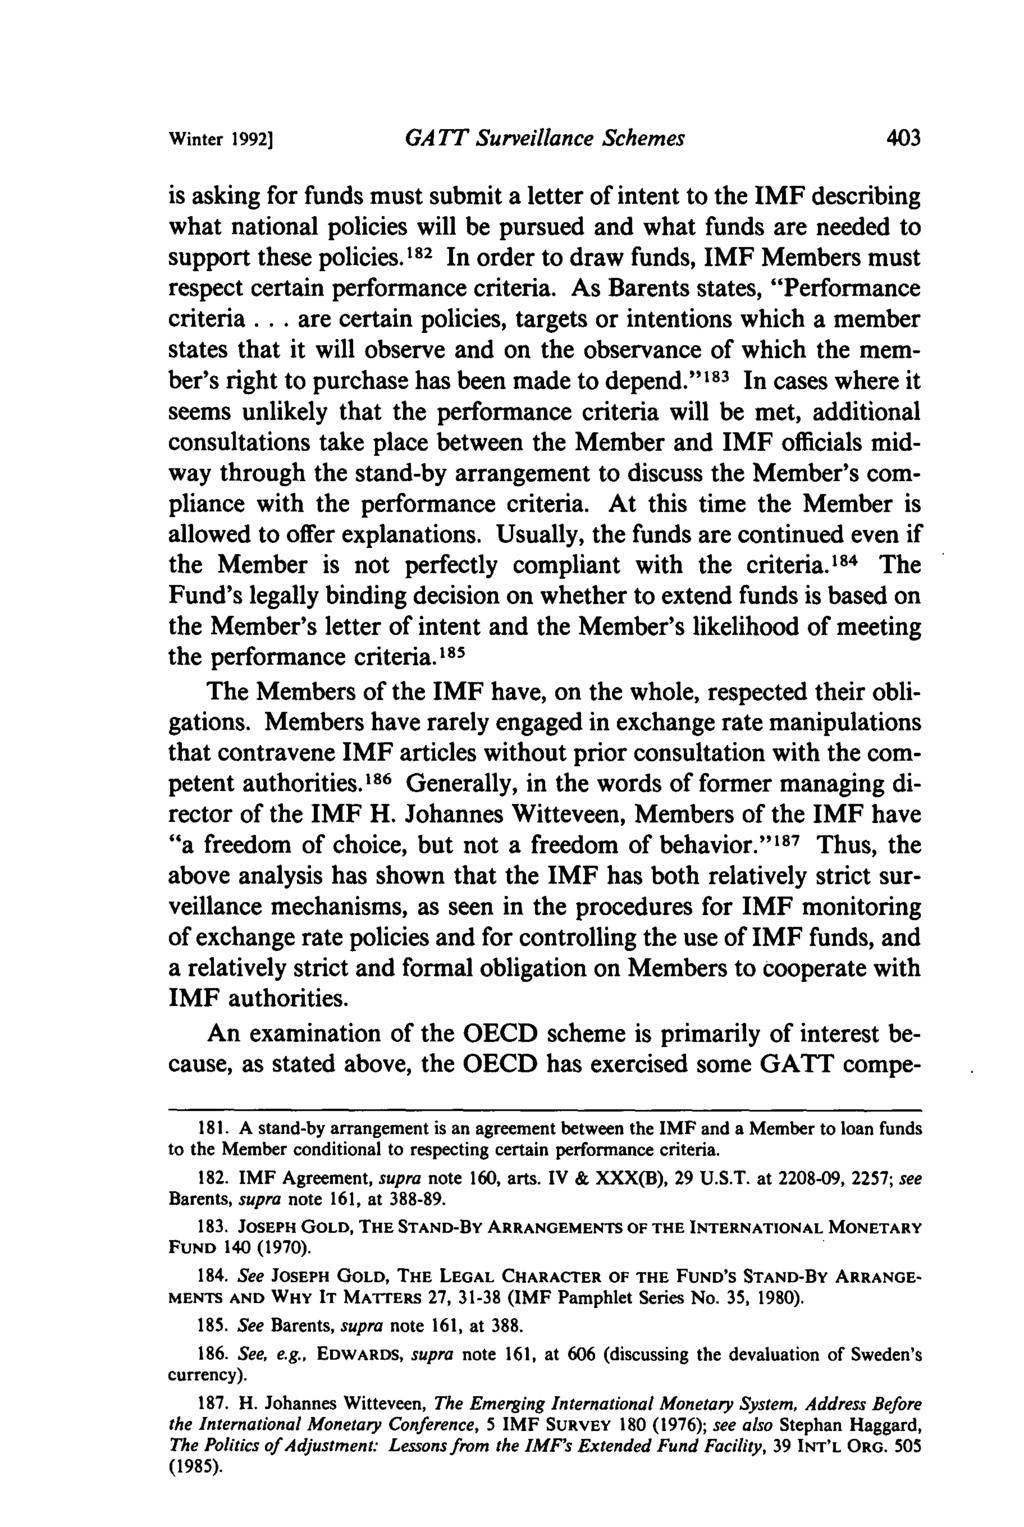 Winter 1992] GATT Surveillance Schemes is asking for funds must submit a letter of intent to the IMF describing what national policies will be pursued and what funds are needed to support these